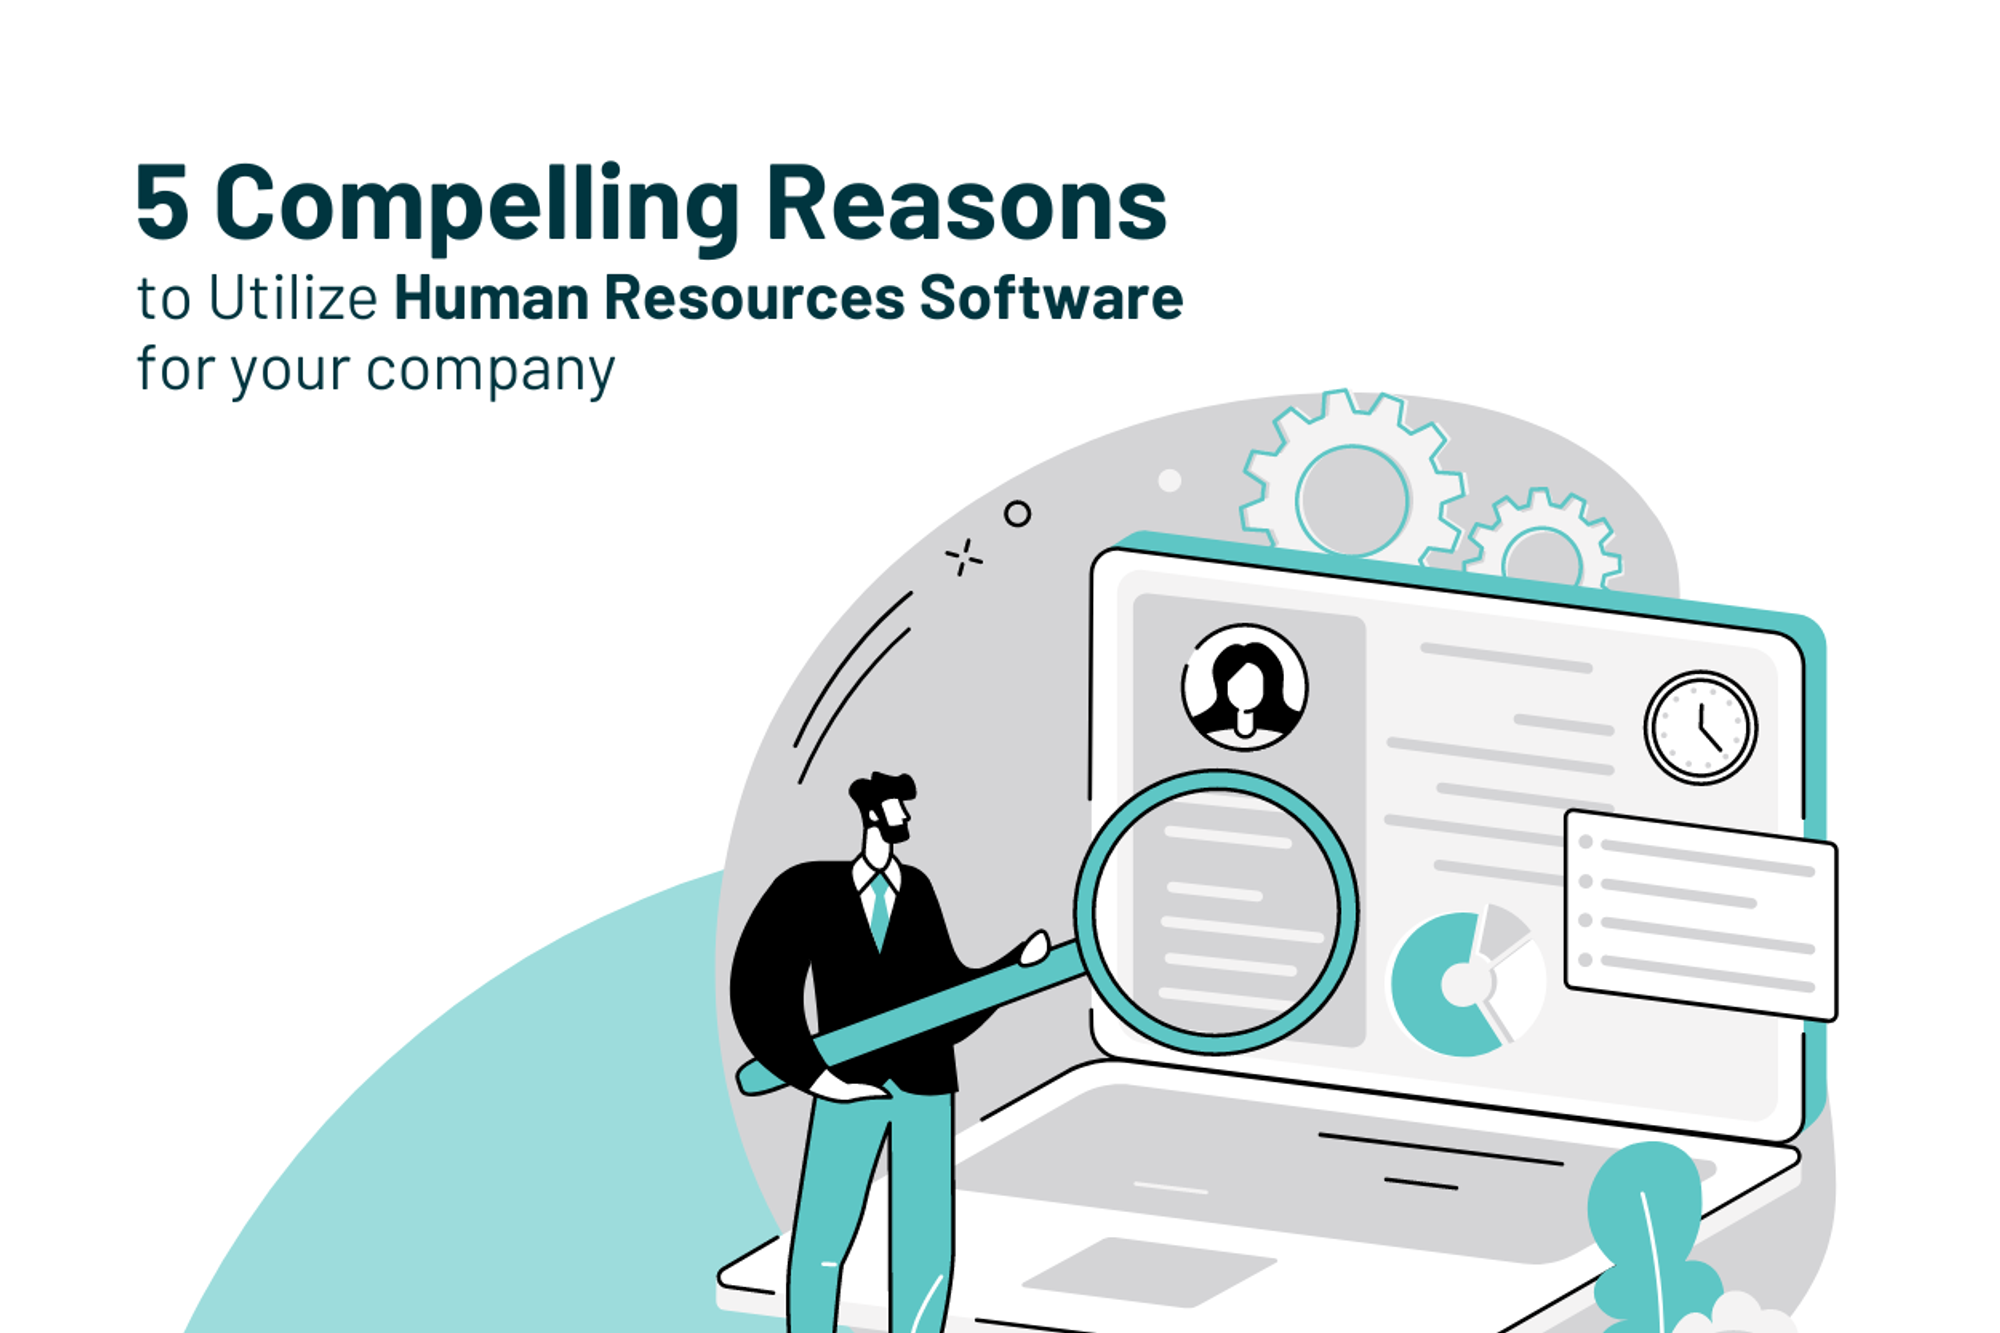 5 Compelling Reasons to Utilize Human Resources Software for Your Company